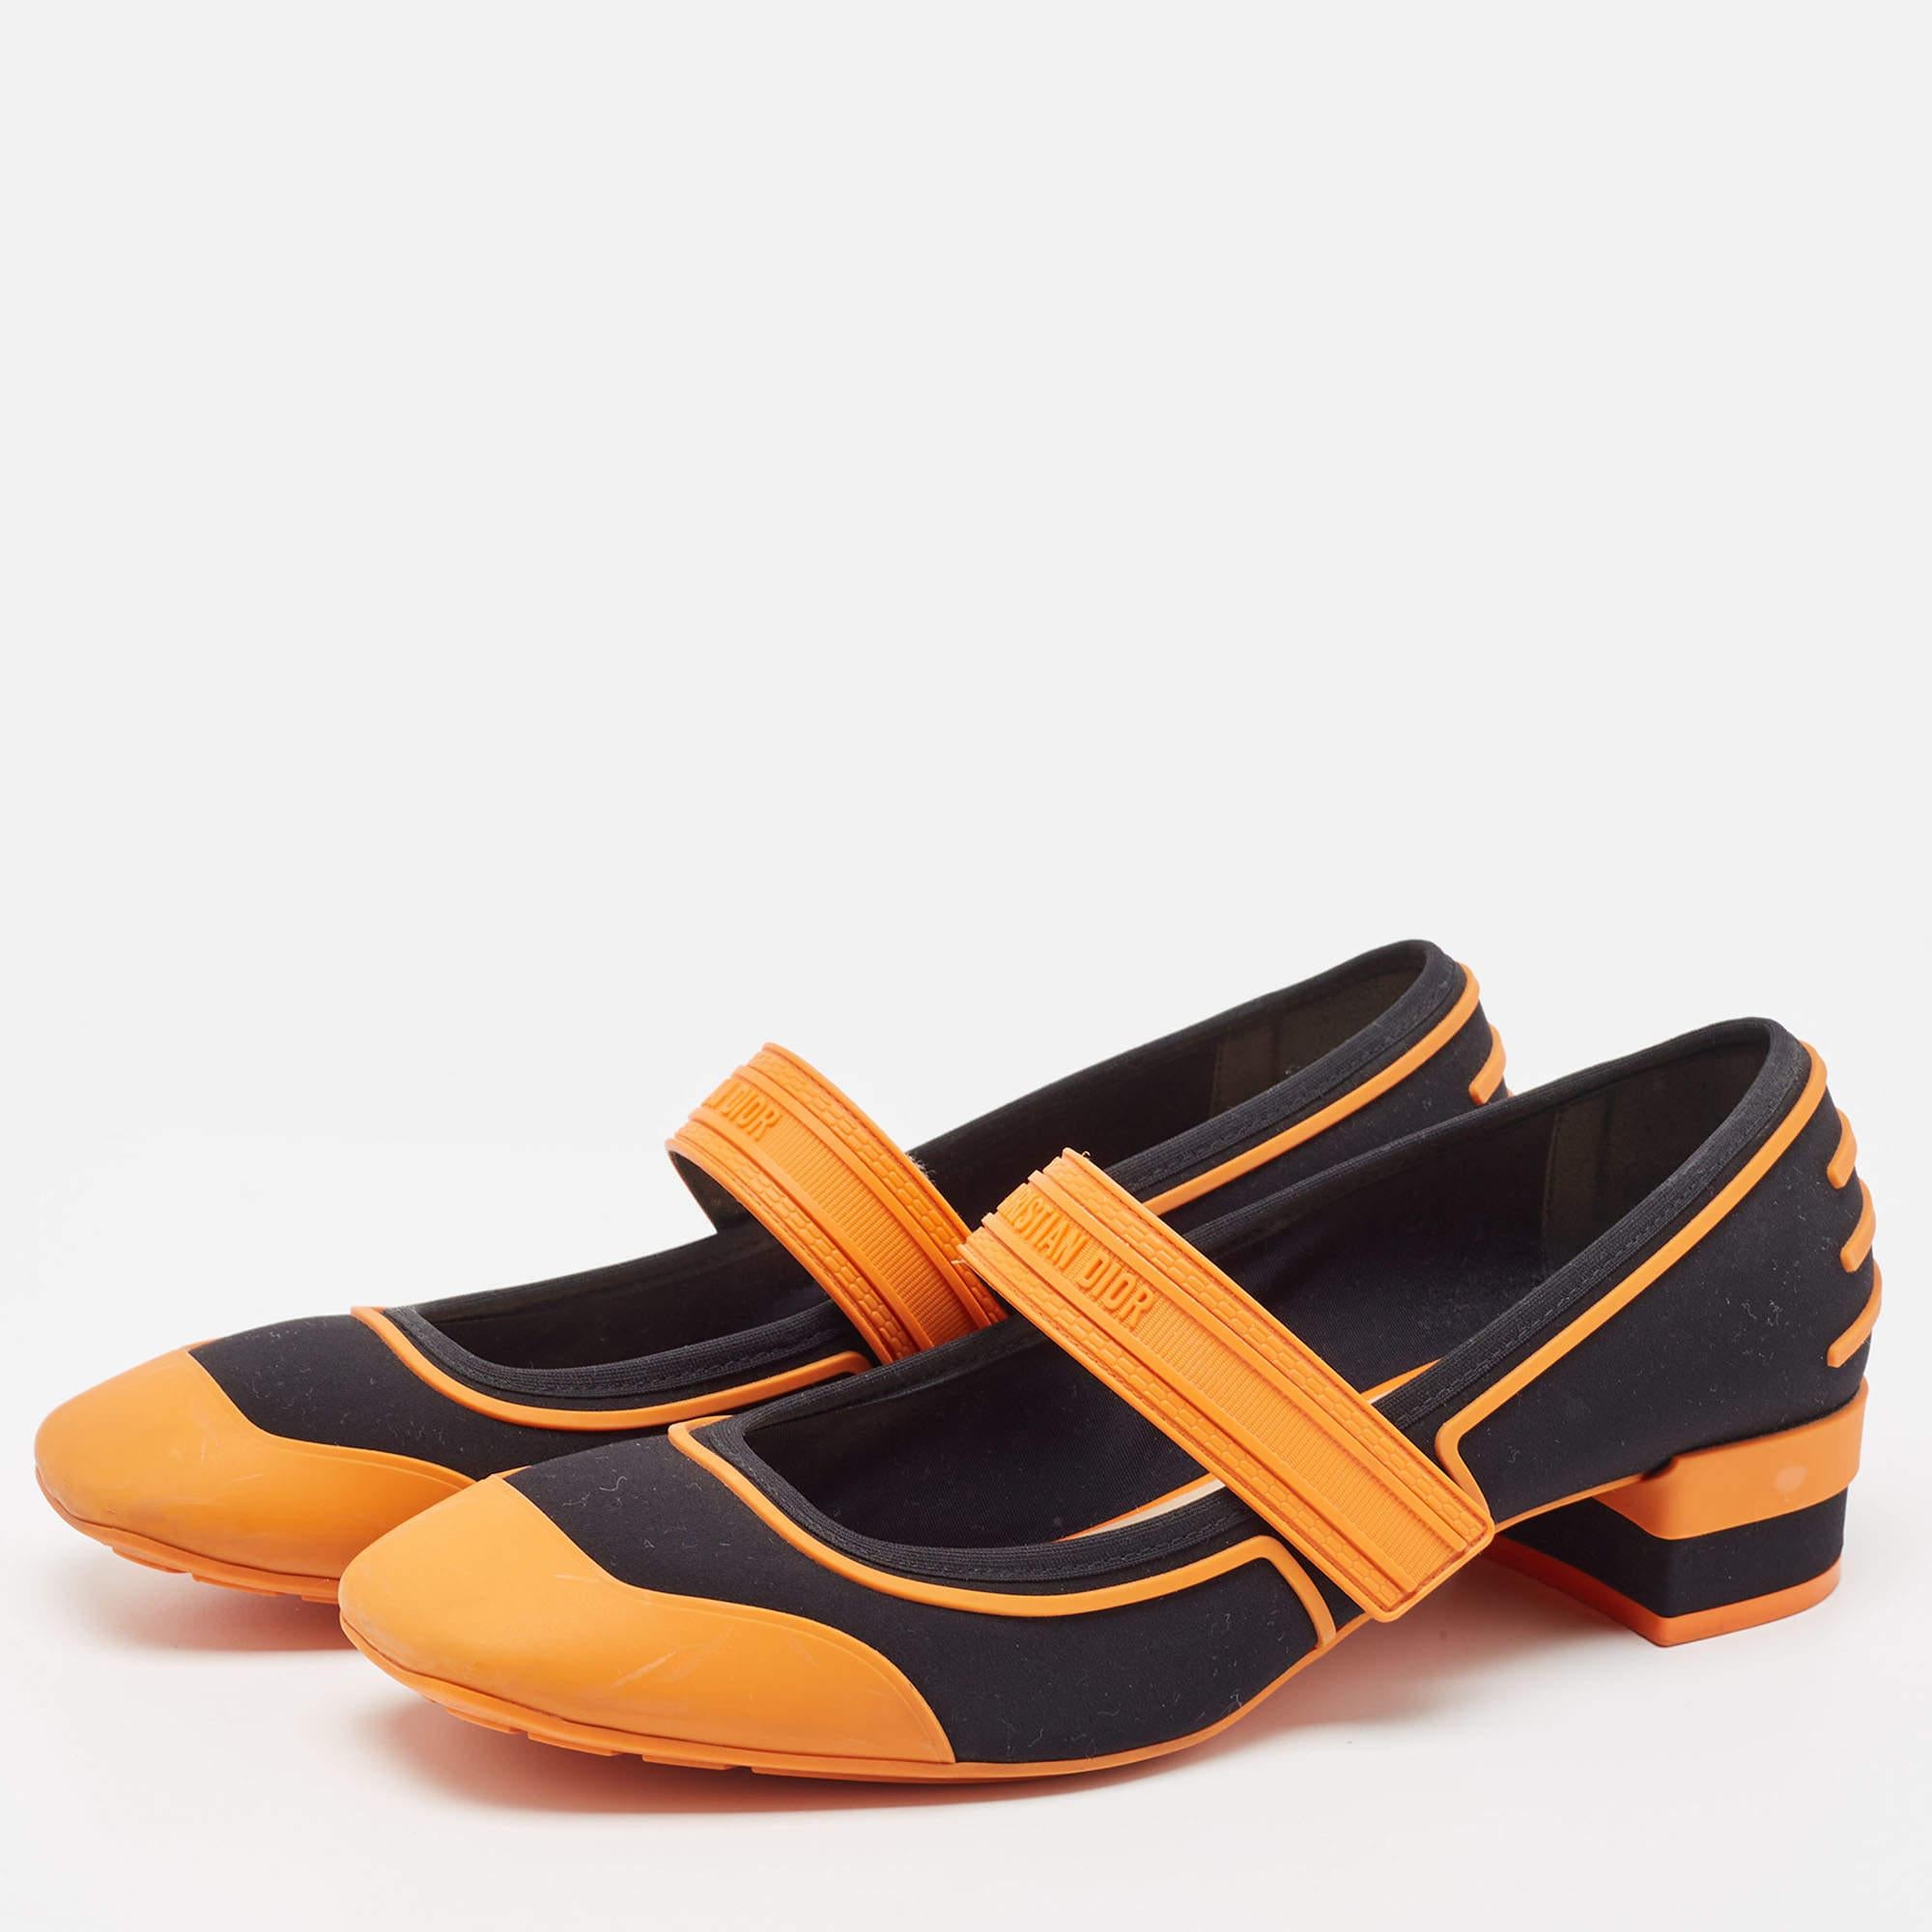 Dior Orange/Black Rubber and Fabric Roller Mary Jane Pumps Size 40 2